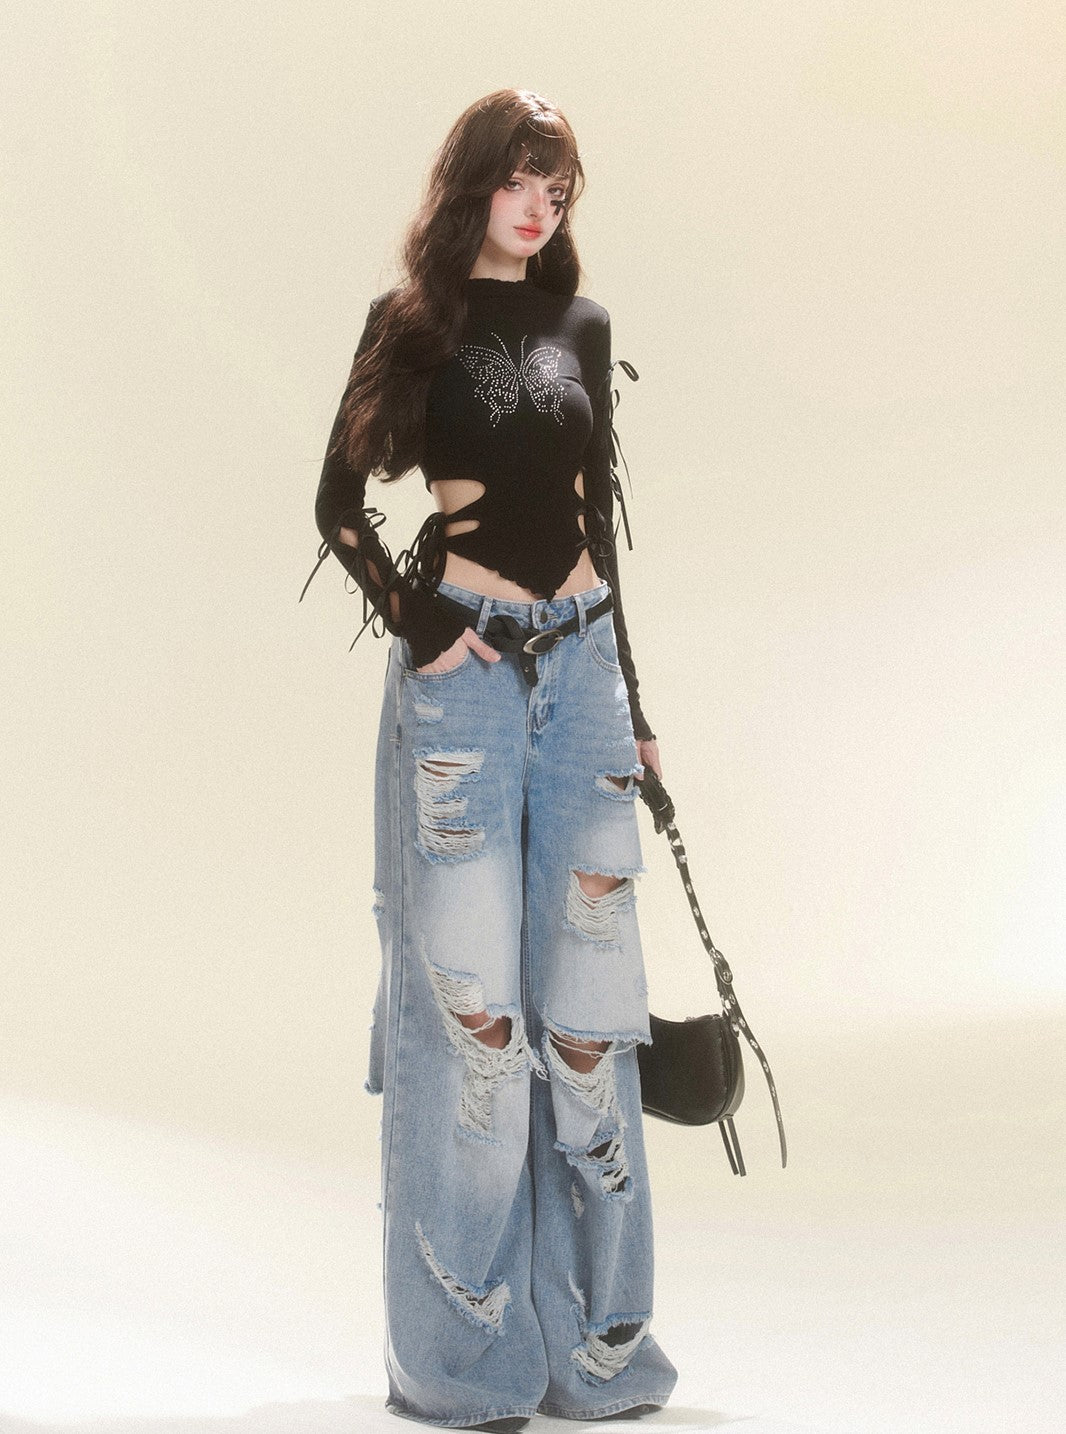 Ripped Straight Leg Light Color Jeans DIA0101